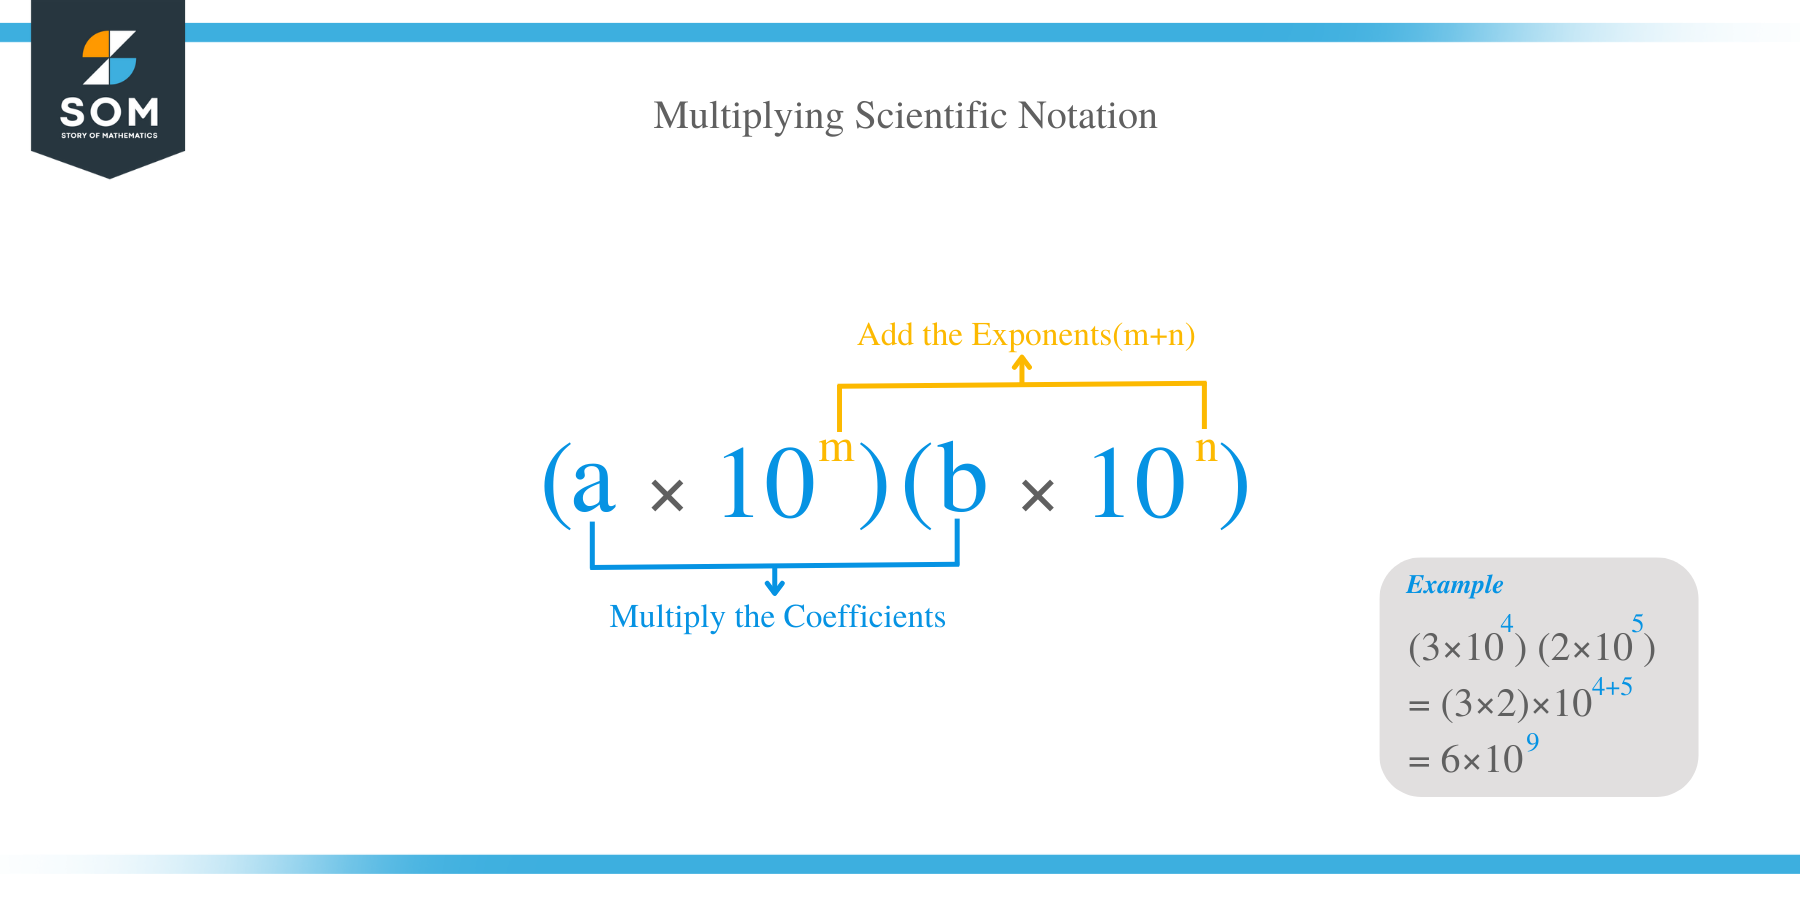 How to Multiply Scientific Notation?